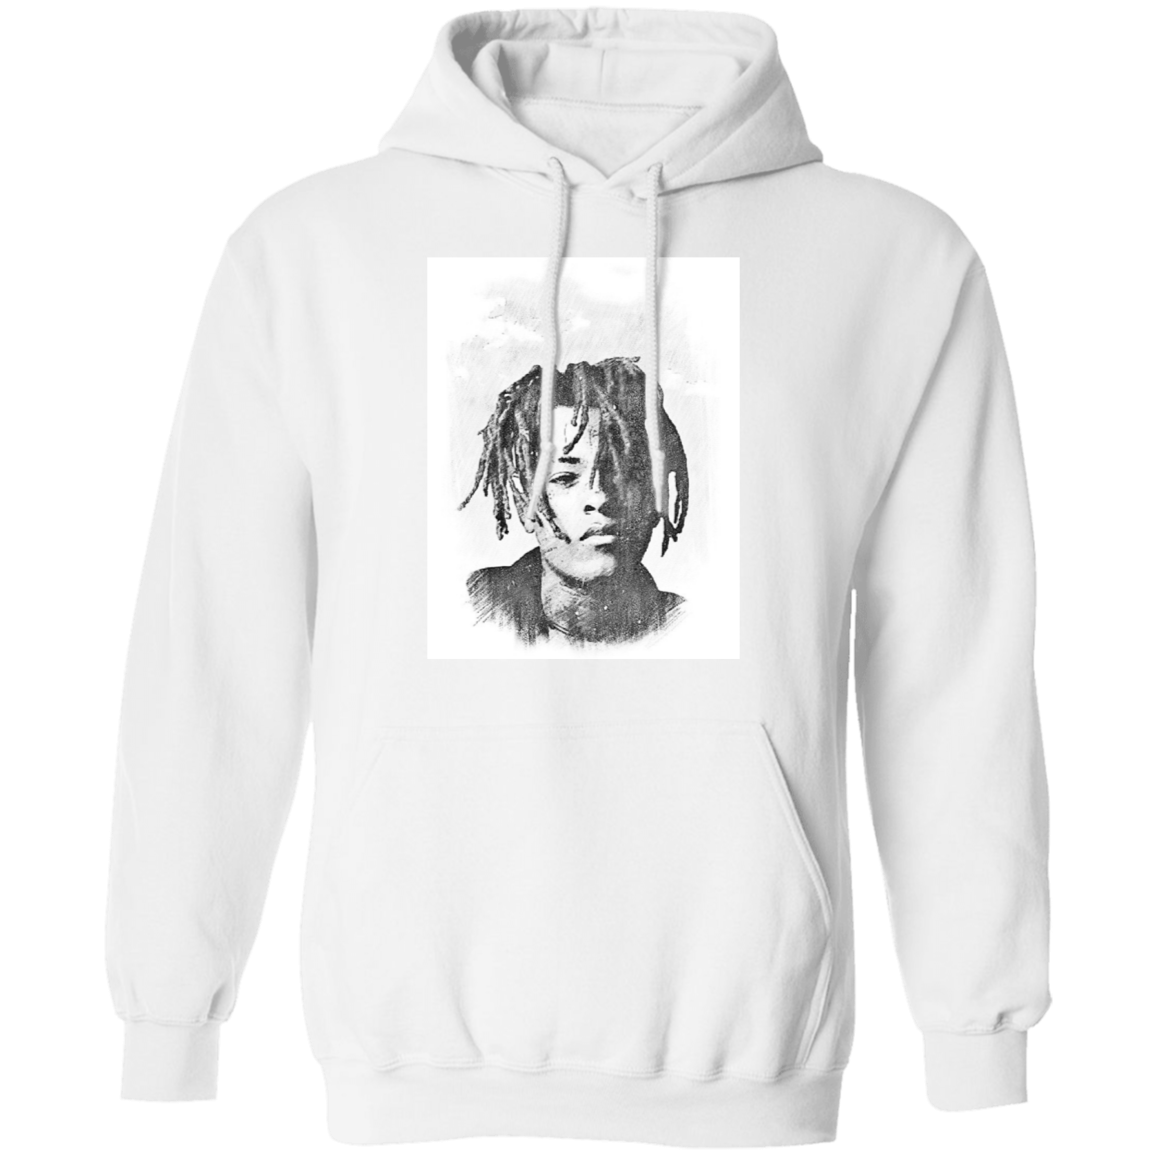 xxxtentacion is on the front of a white graphic hoodie